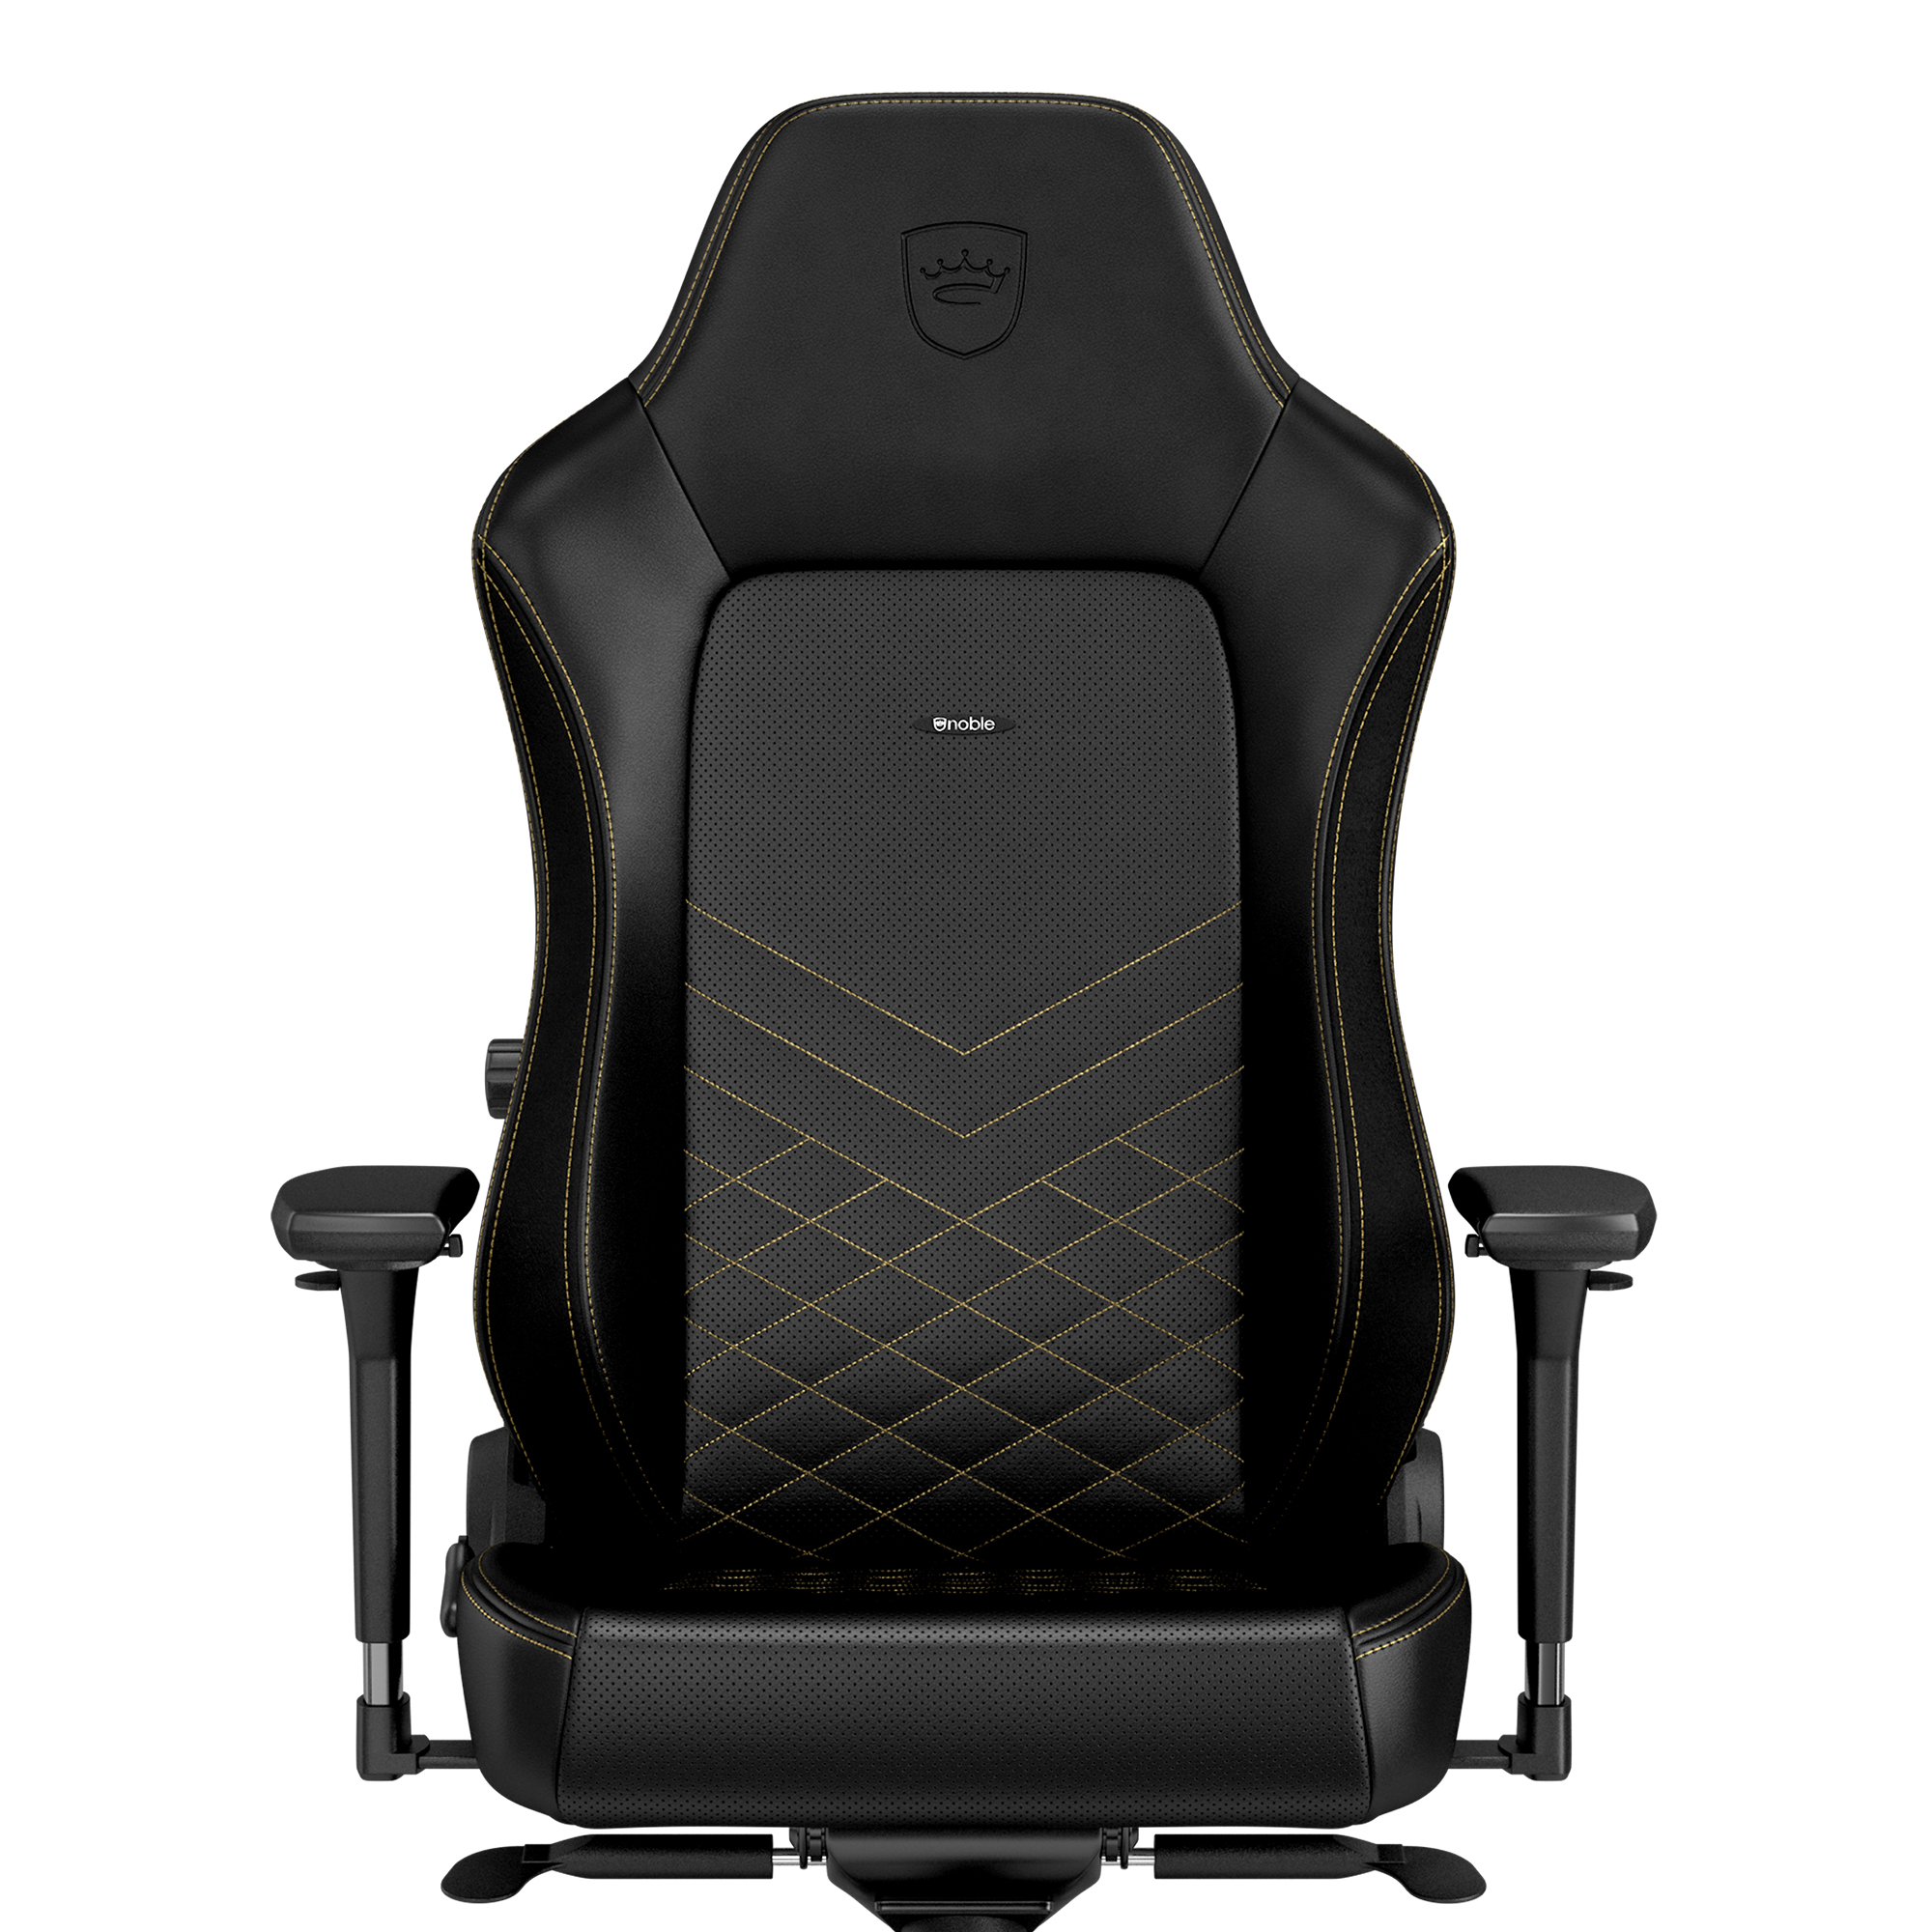 noblechairs - noblechairs HERO Gaming Chair - Black/Gold